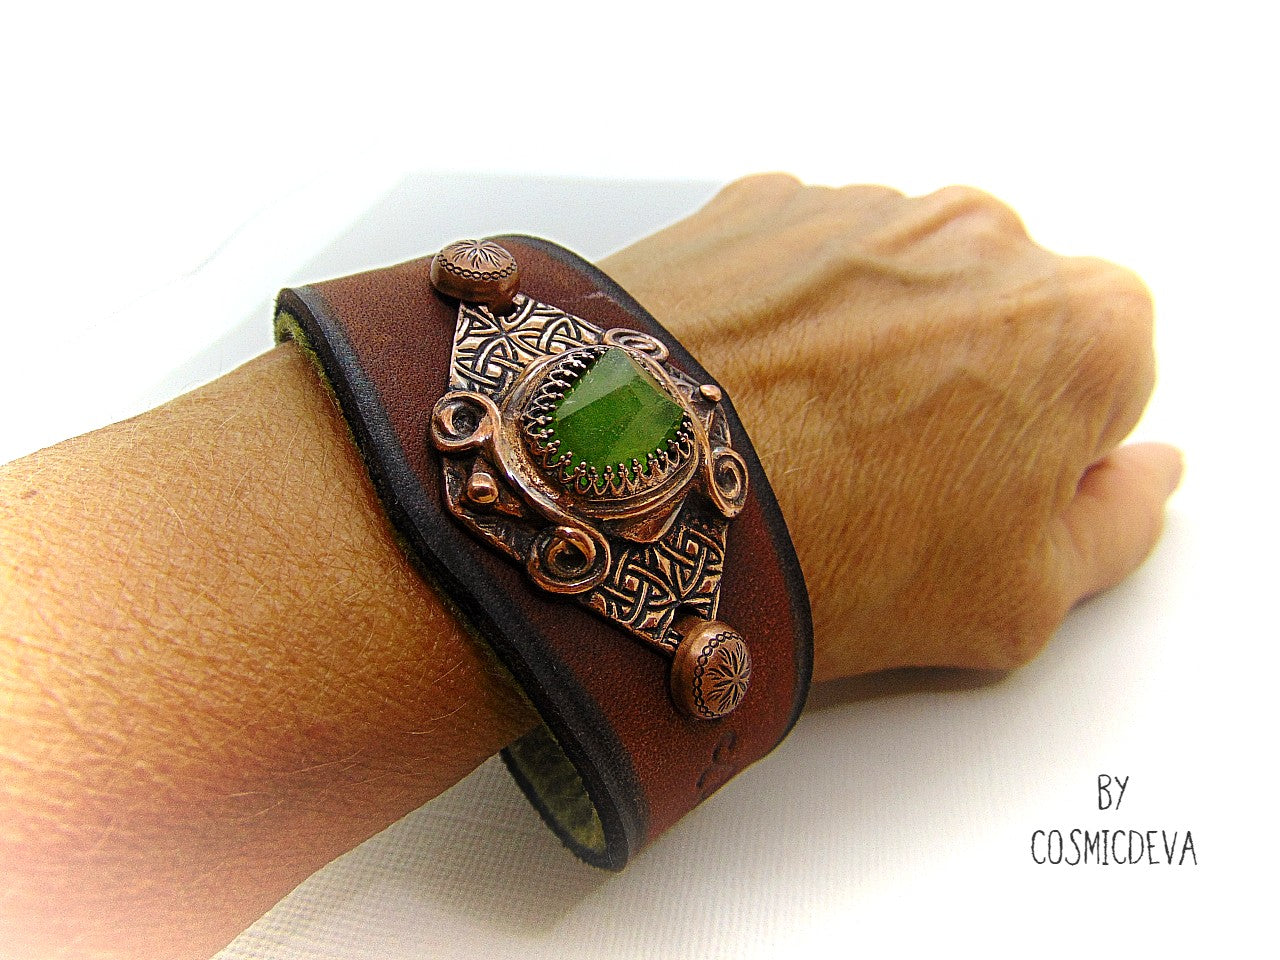 One of a kind handcrafted leather cuff bracelet made of hand cut earthy brown dyed veg tan leather. The focal point is a high quality natural raw green peridot gemstone in a bezel setting on a Celtic design textured solid copper base. The inside of the leather bracelet is lined with olive green felt for your comfort. Cosmicdeva